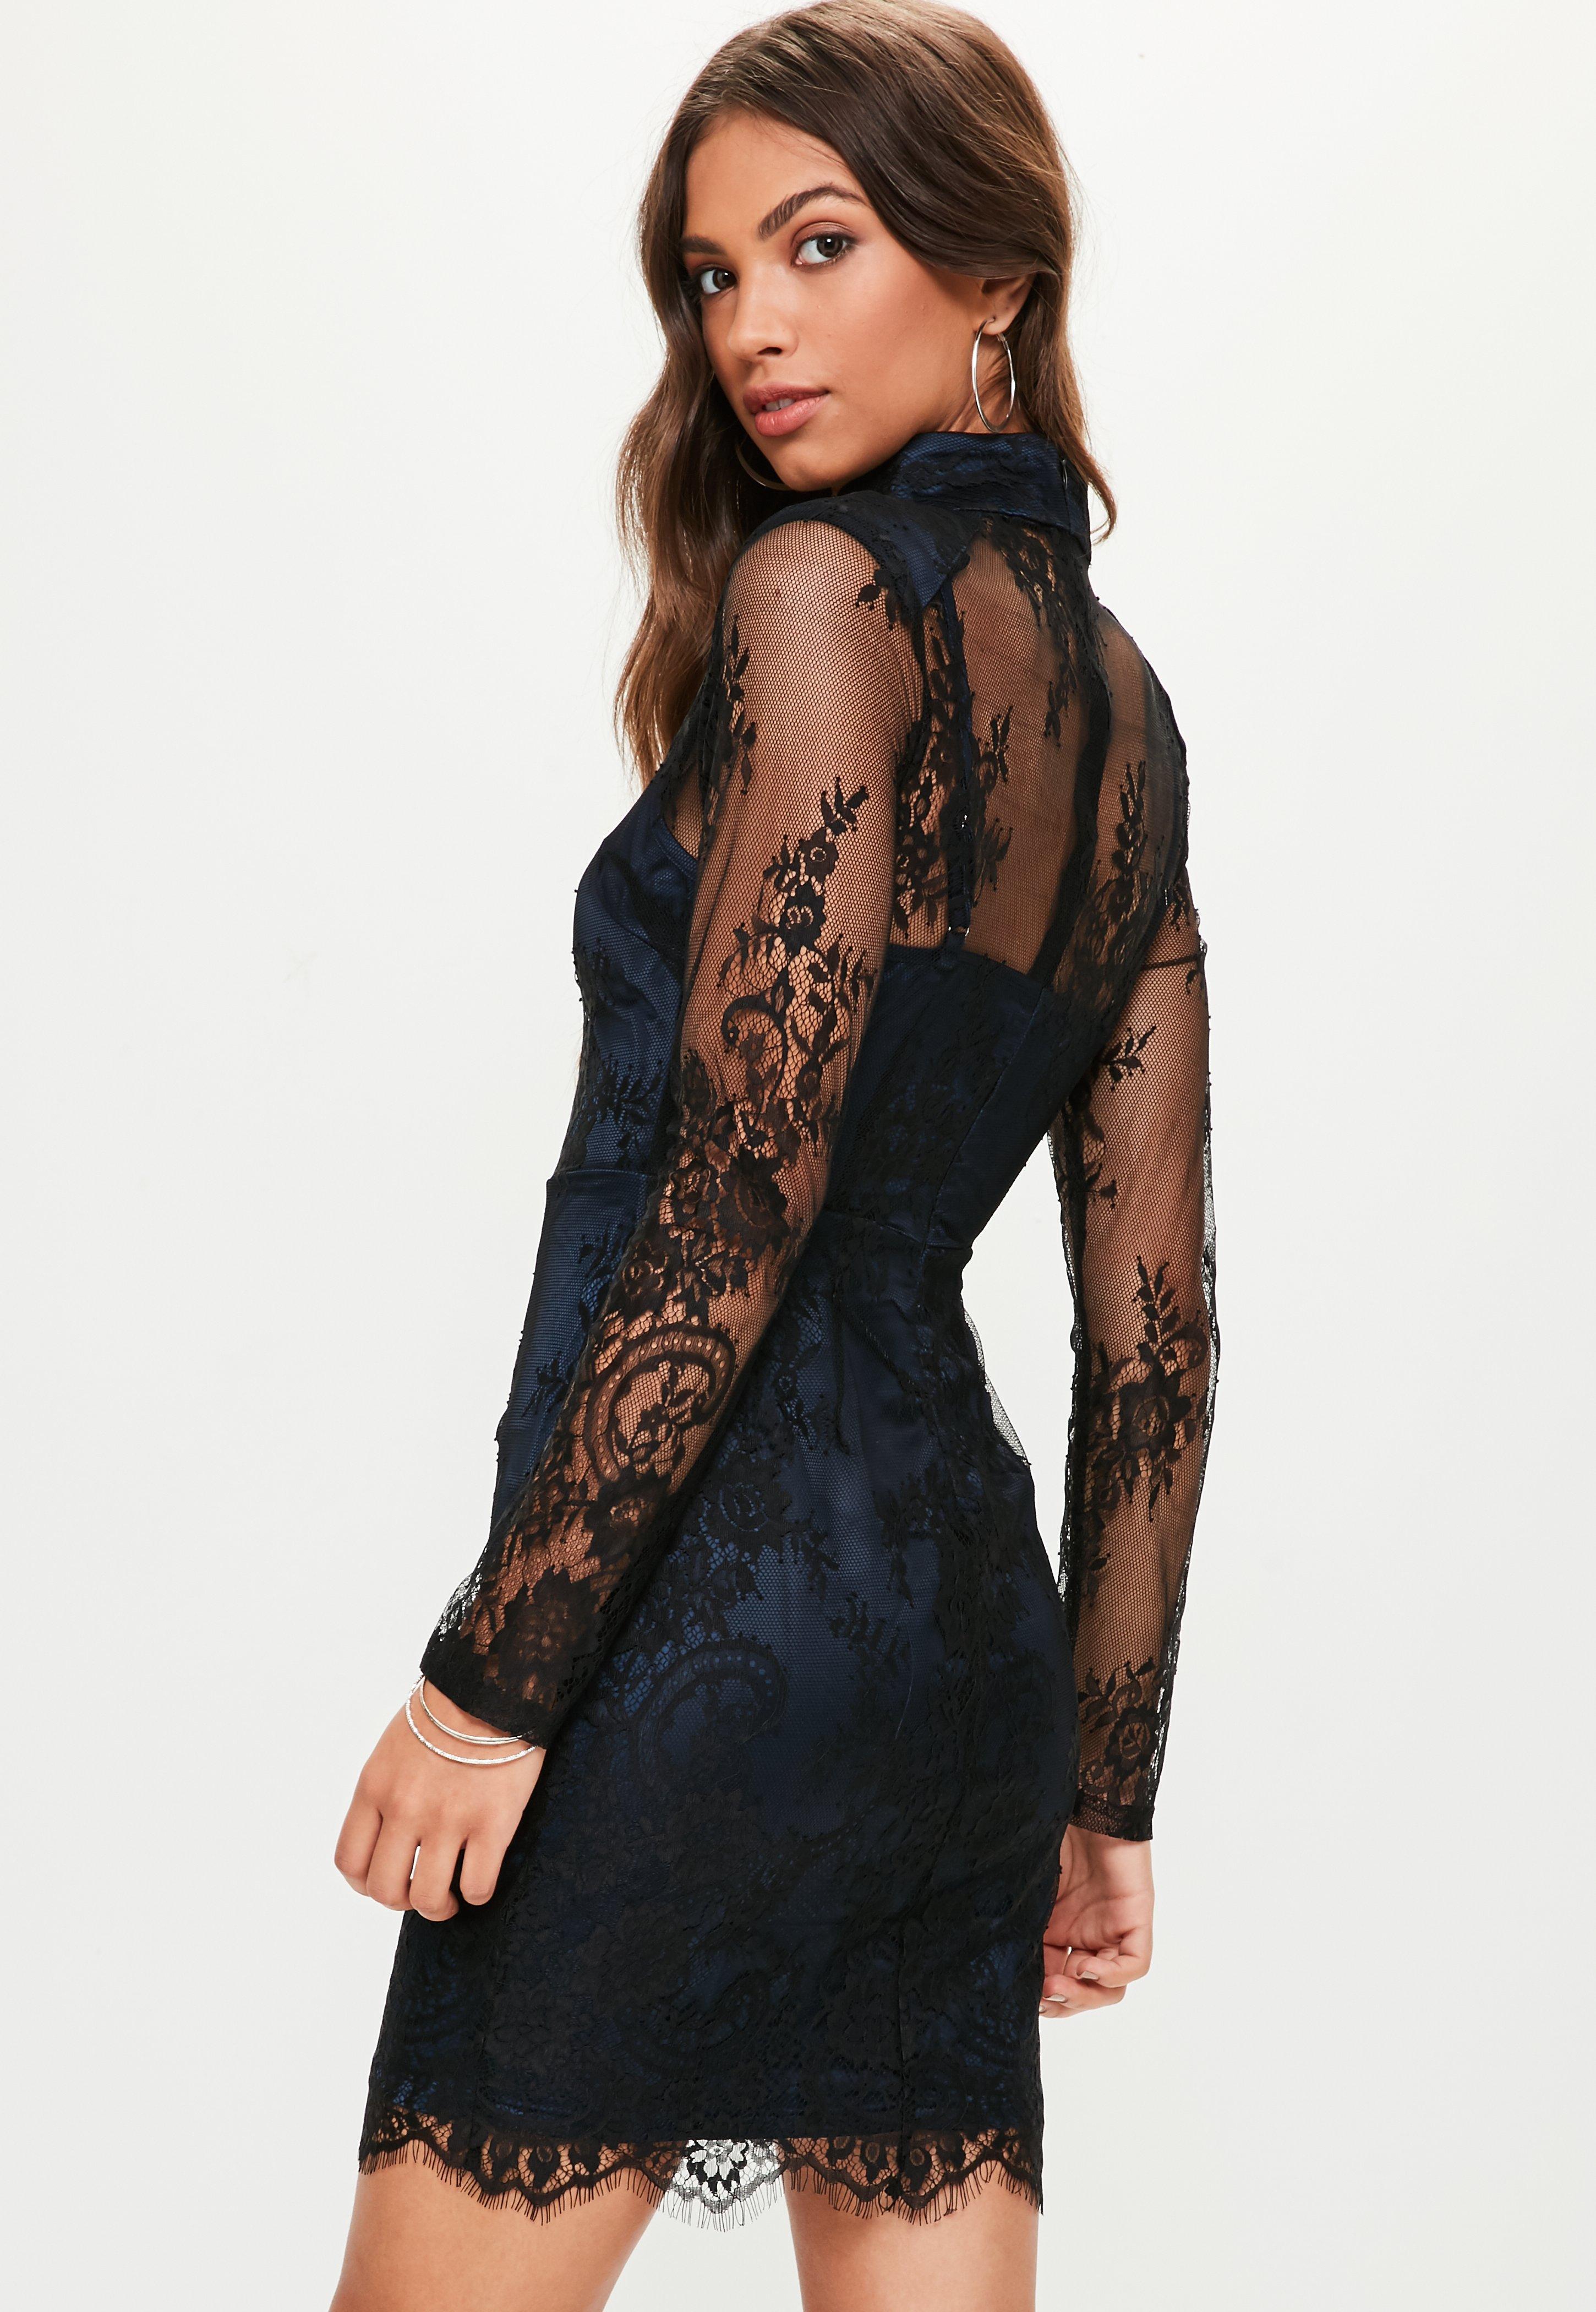 Lyst - Missguided Black Lace High Neck Padded Bodycon Dress in Black